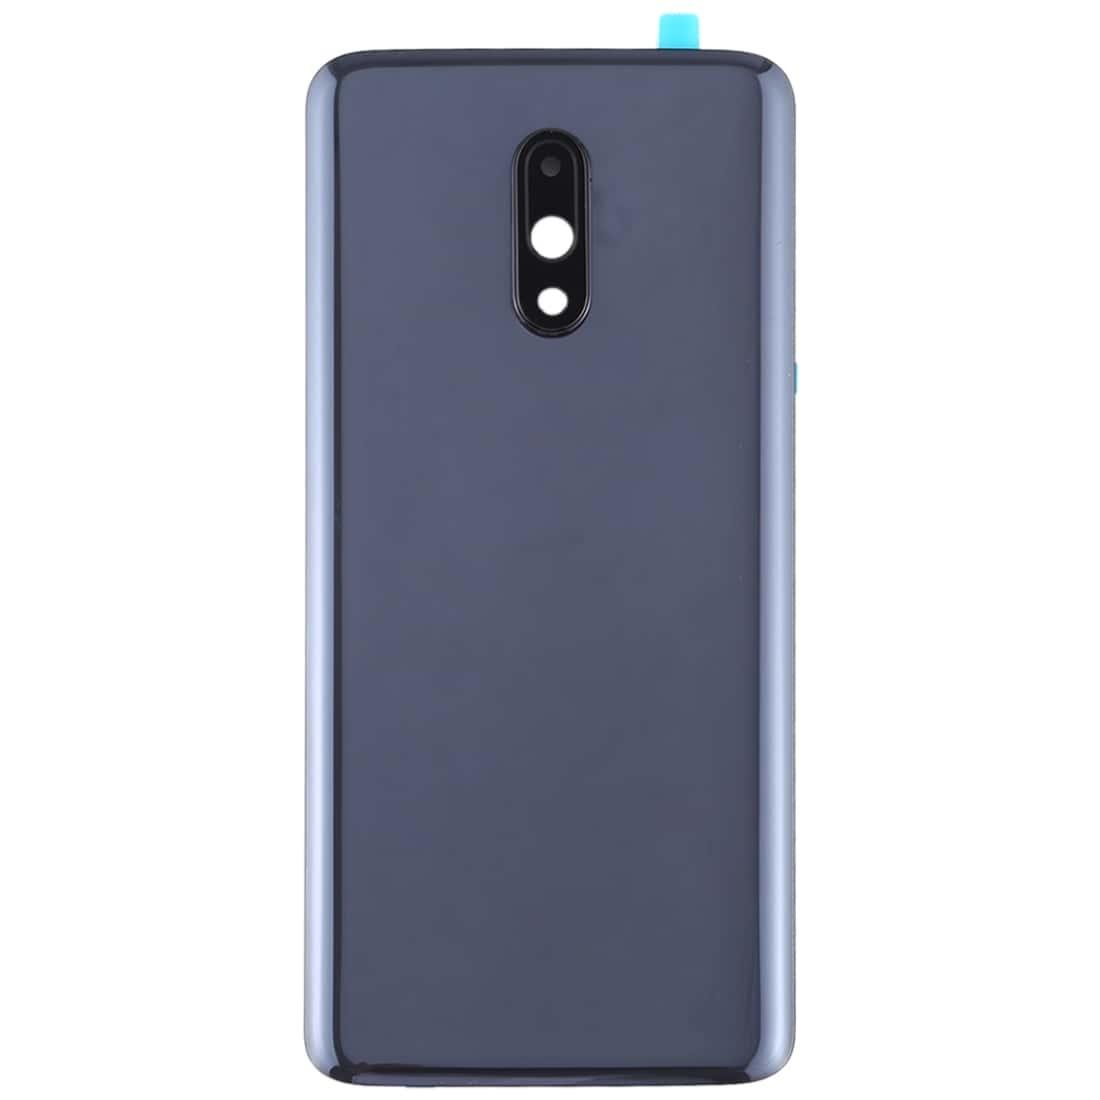 Back Glass Panel for Oneplus 7 Grey with Camera Lens